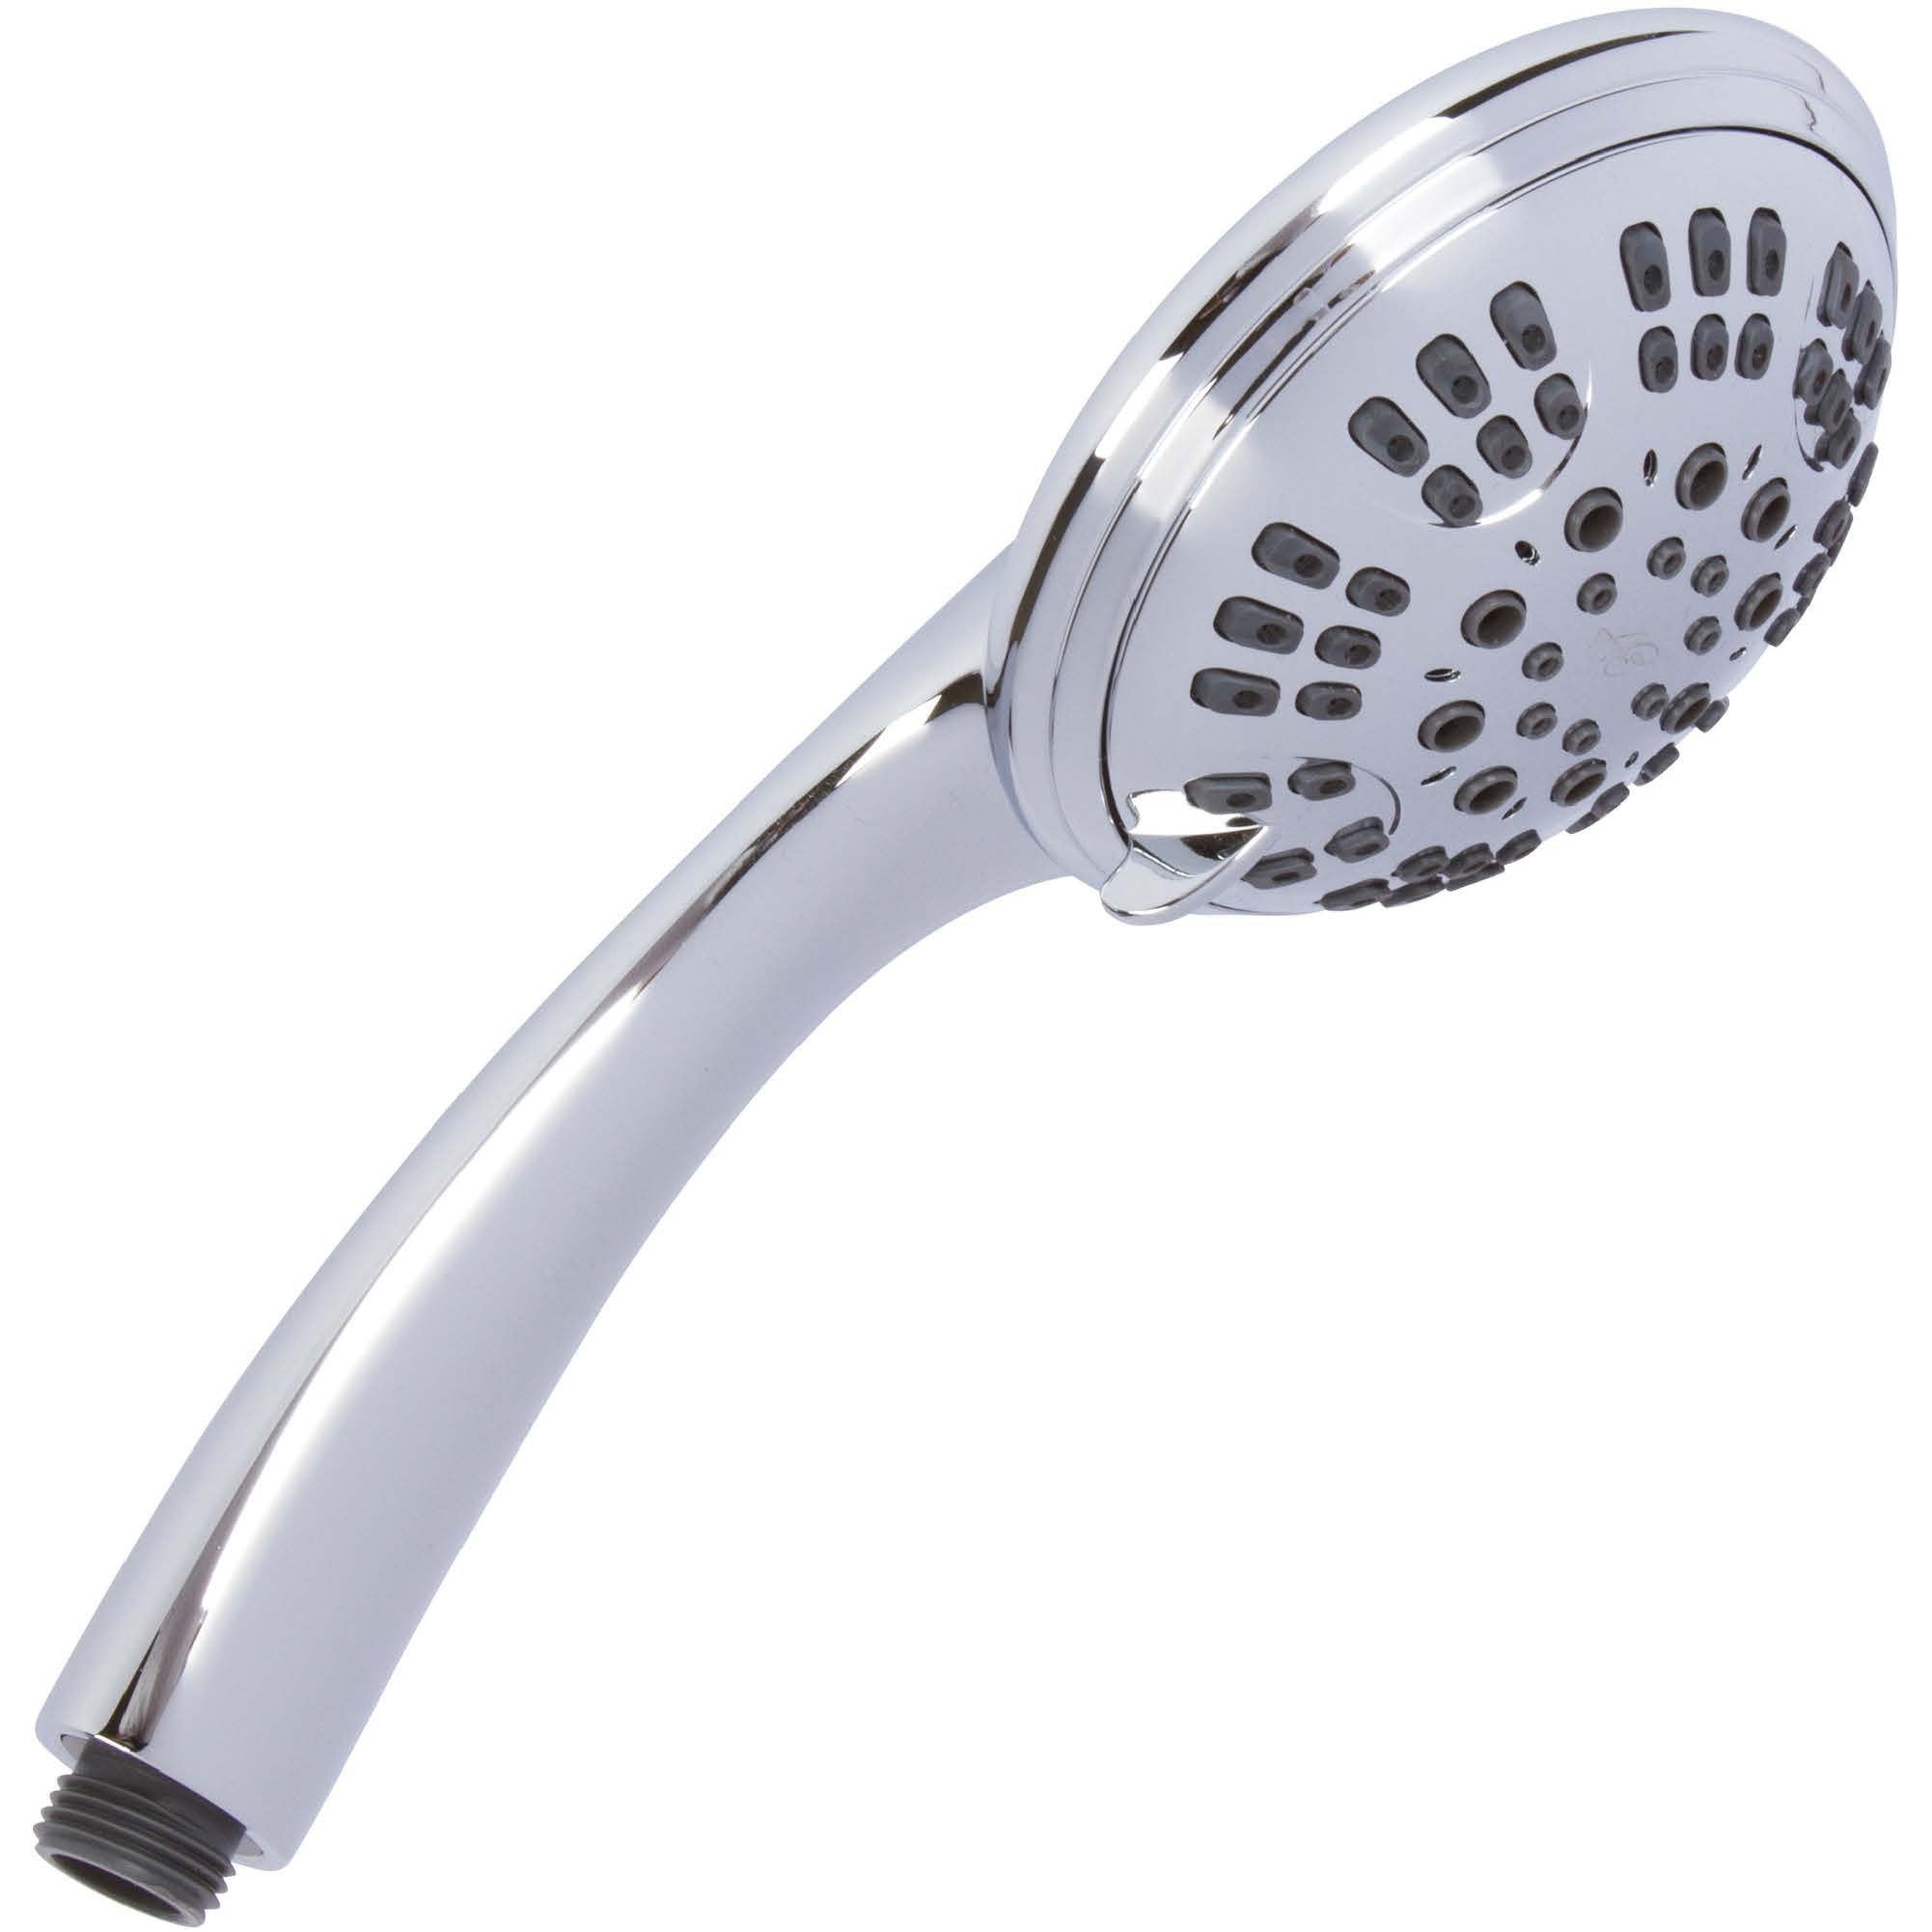 ALL METAL Handheld Shower Head with Hose and Brass Holder CHROME 2.5 GPM  High